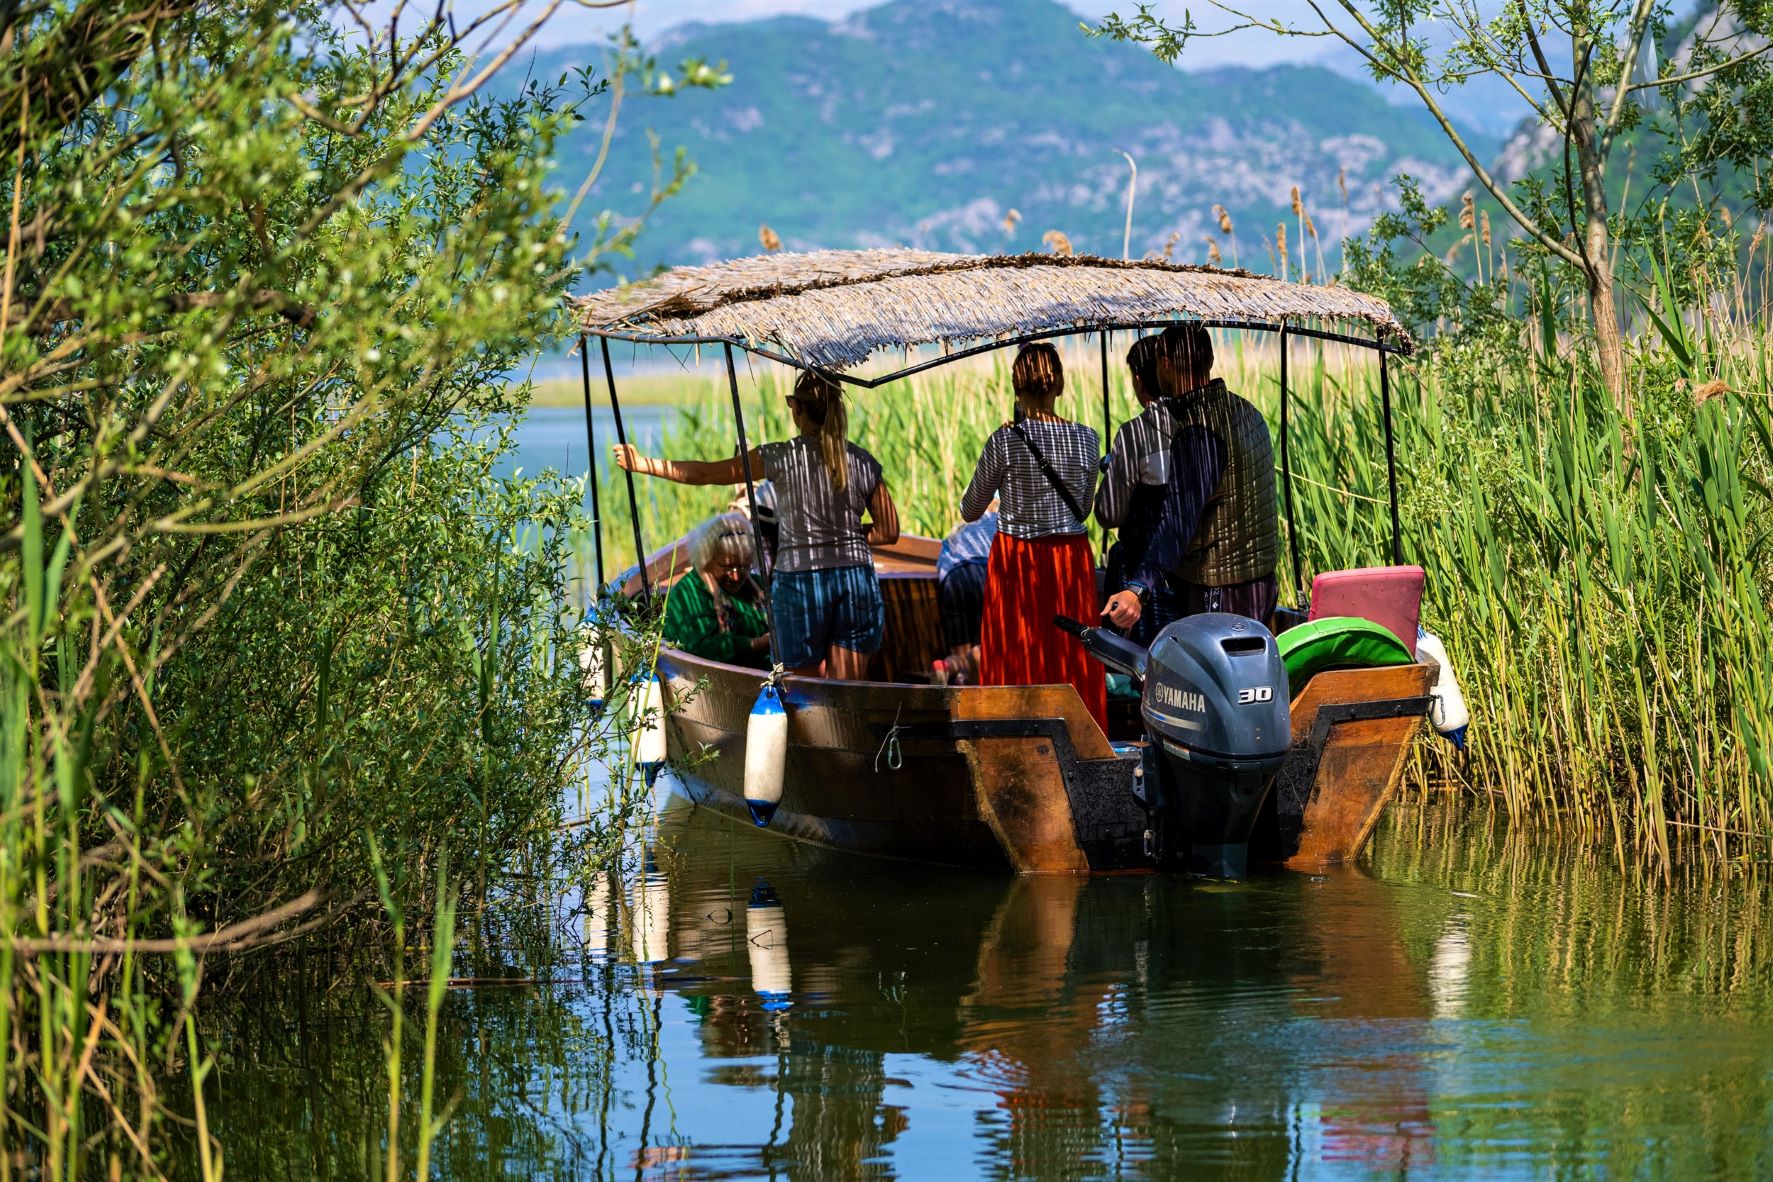 A photo shows a group of people, inside a traditional wooden boat, sailing through a channel fringed by reeds.